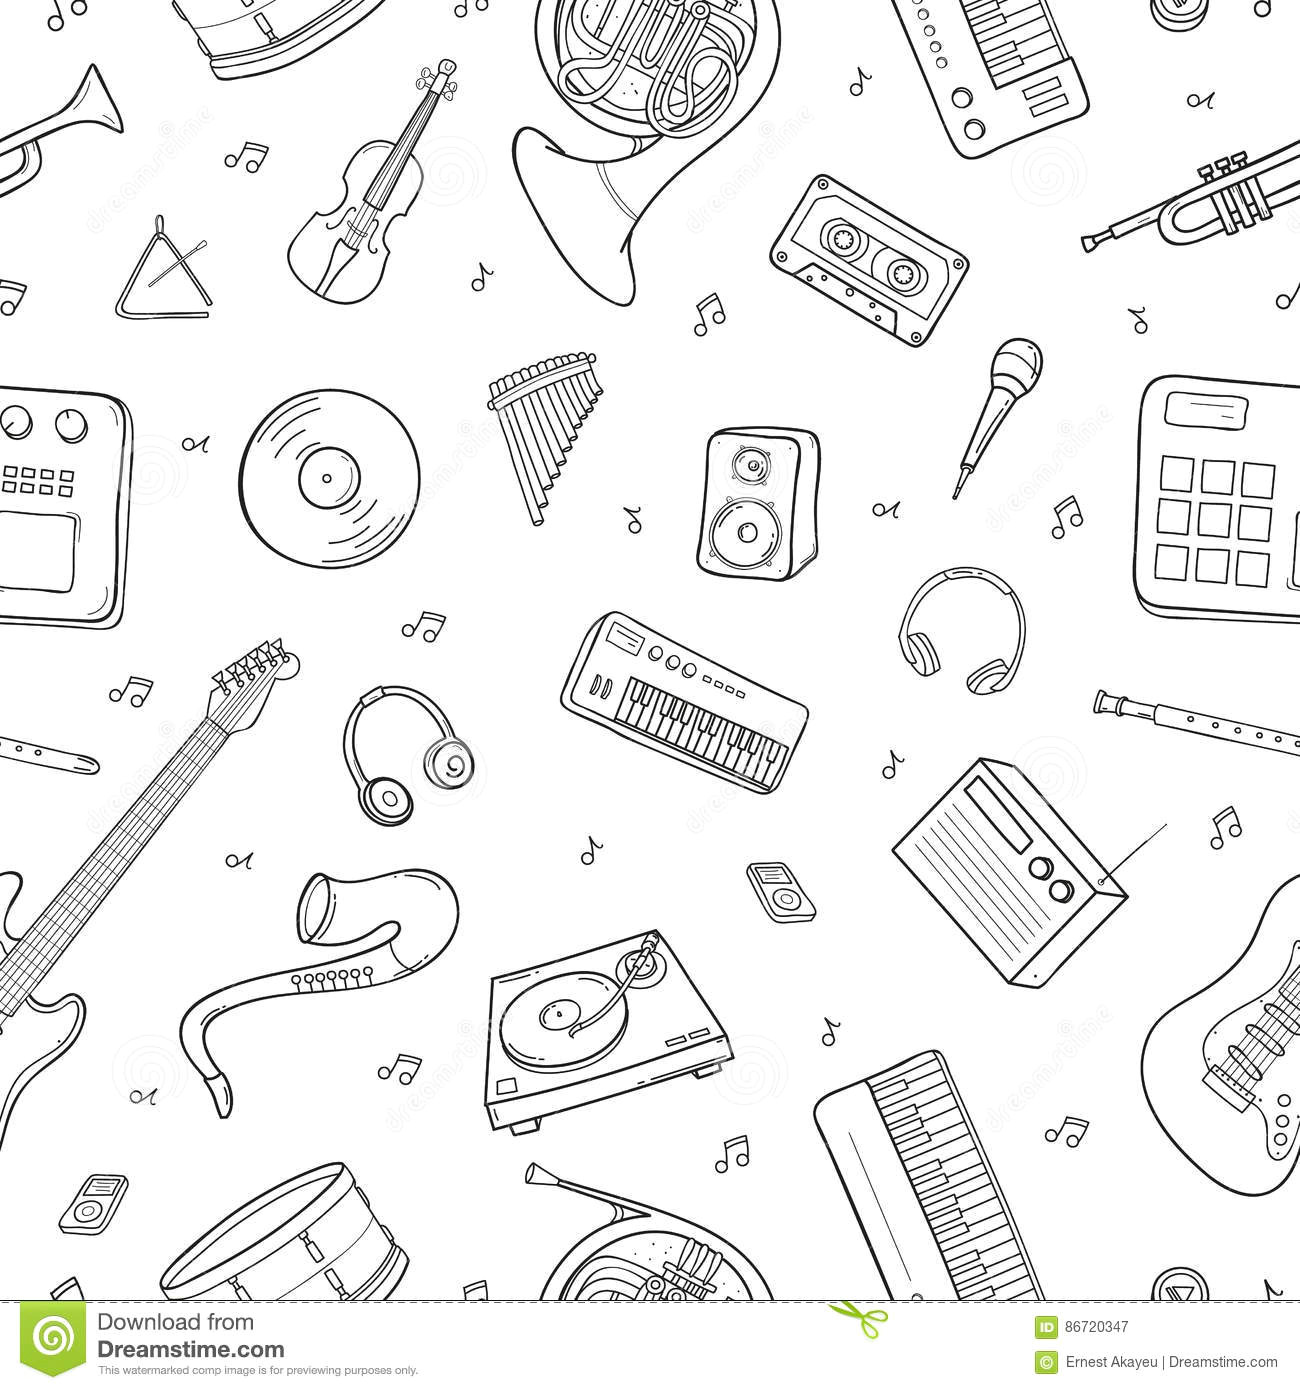 seamless pattern with various musical instruments symbols objects and elements